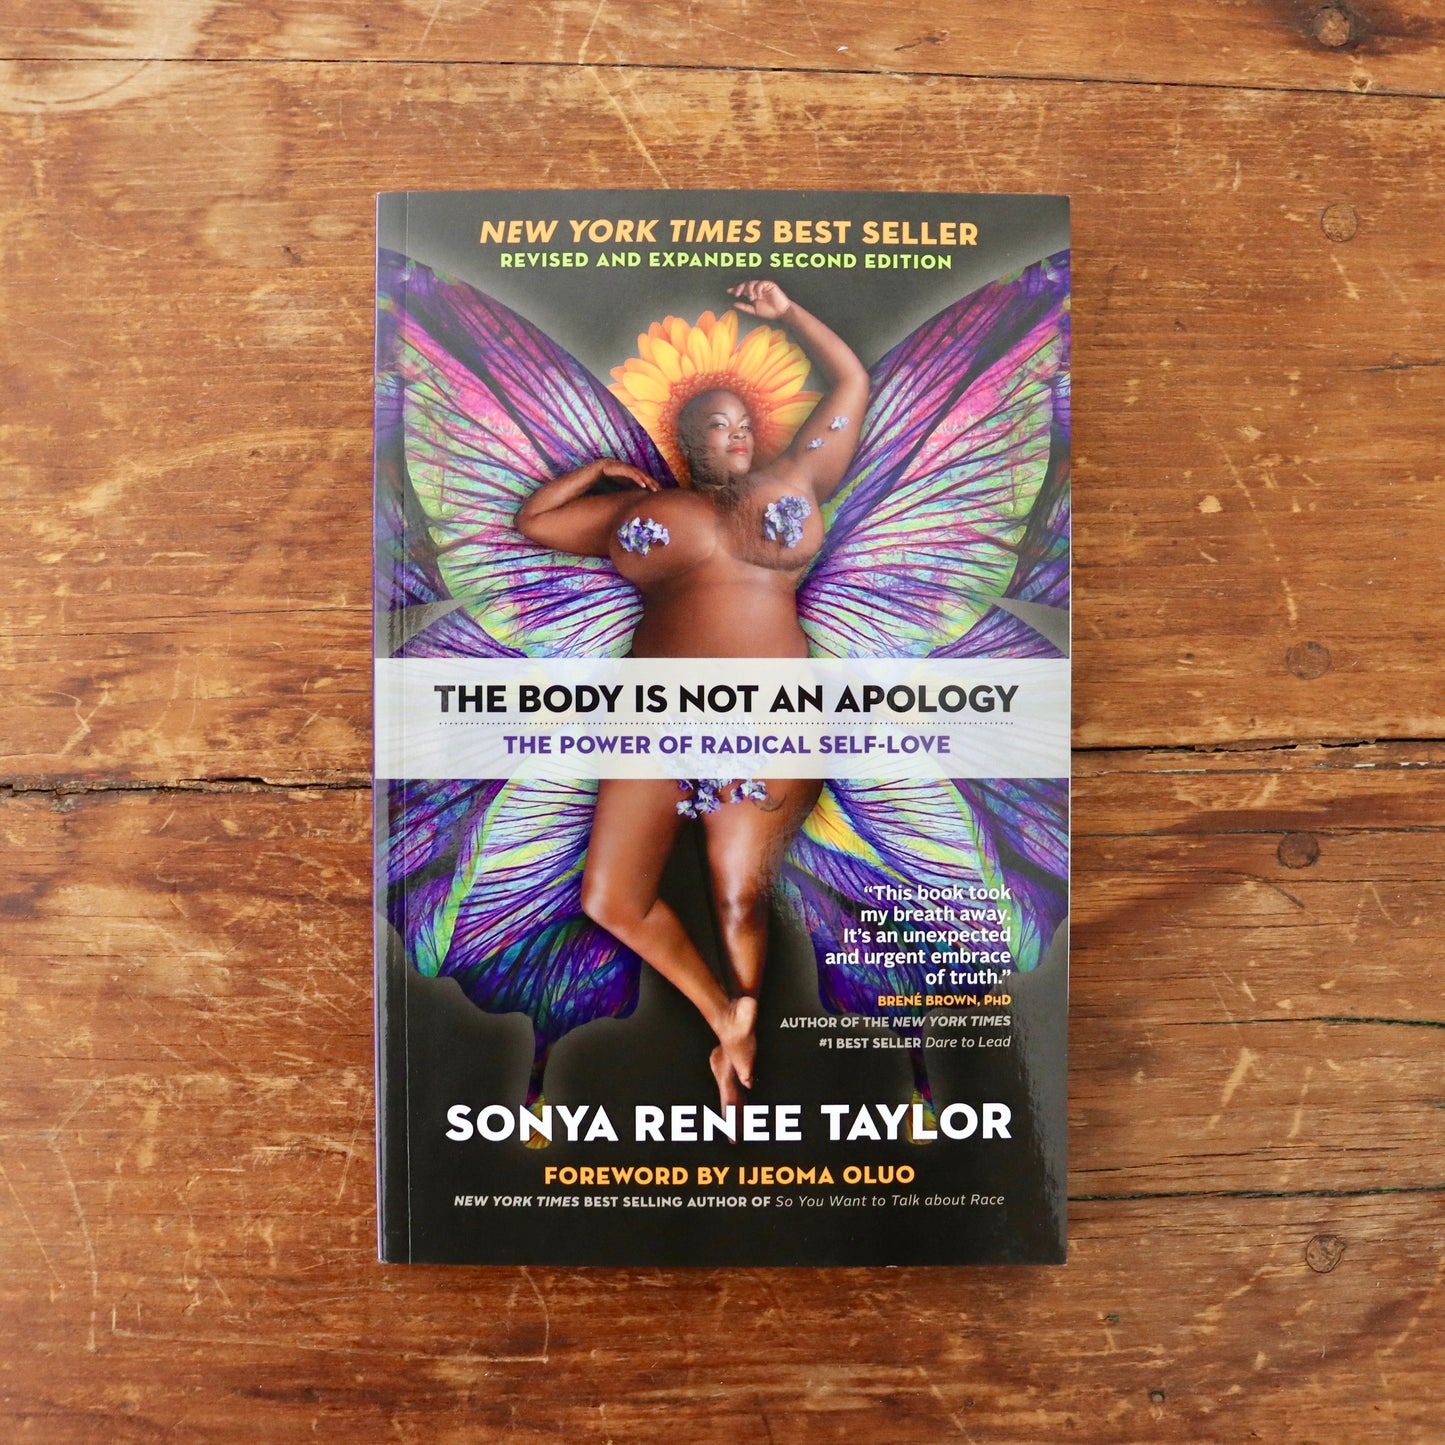 The Body Is Not An Apology, Second Edition